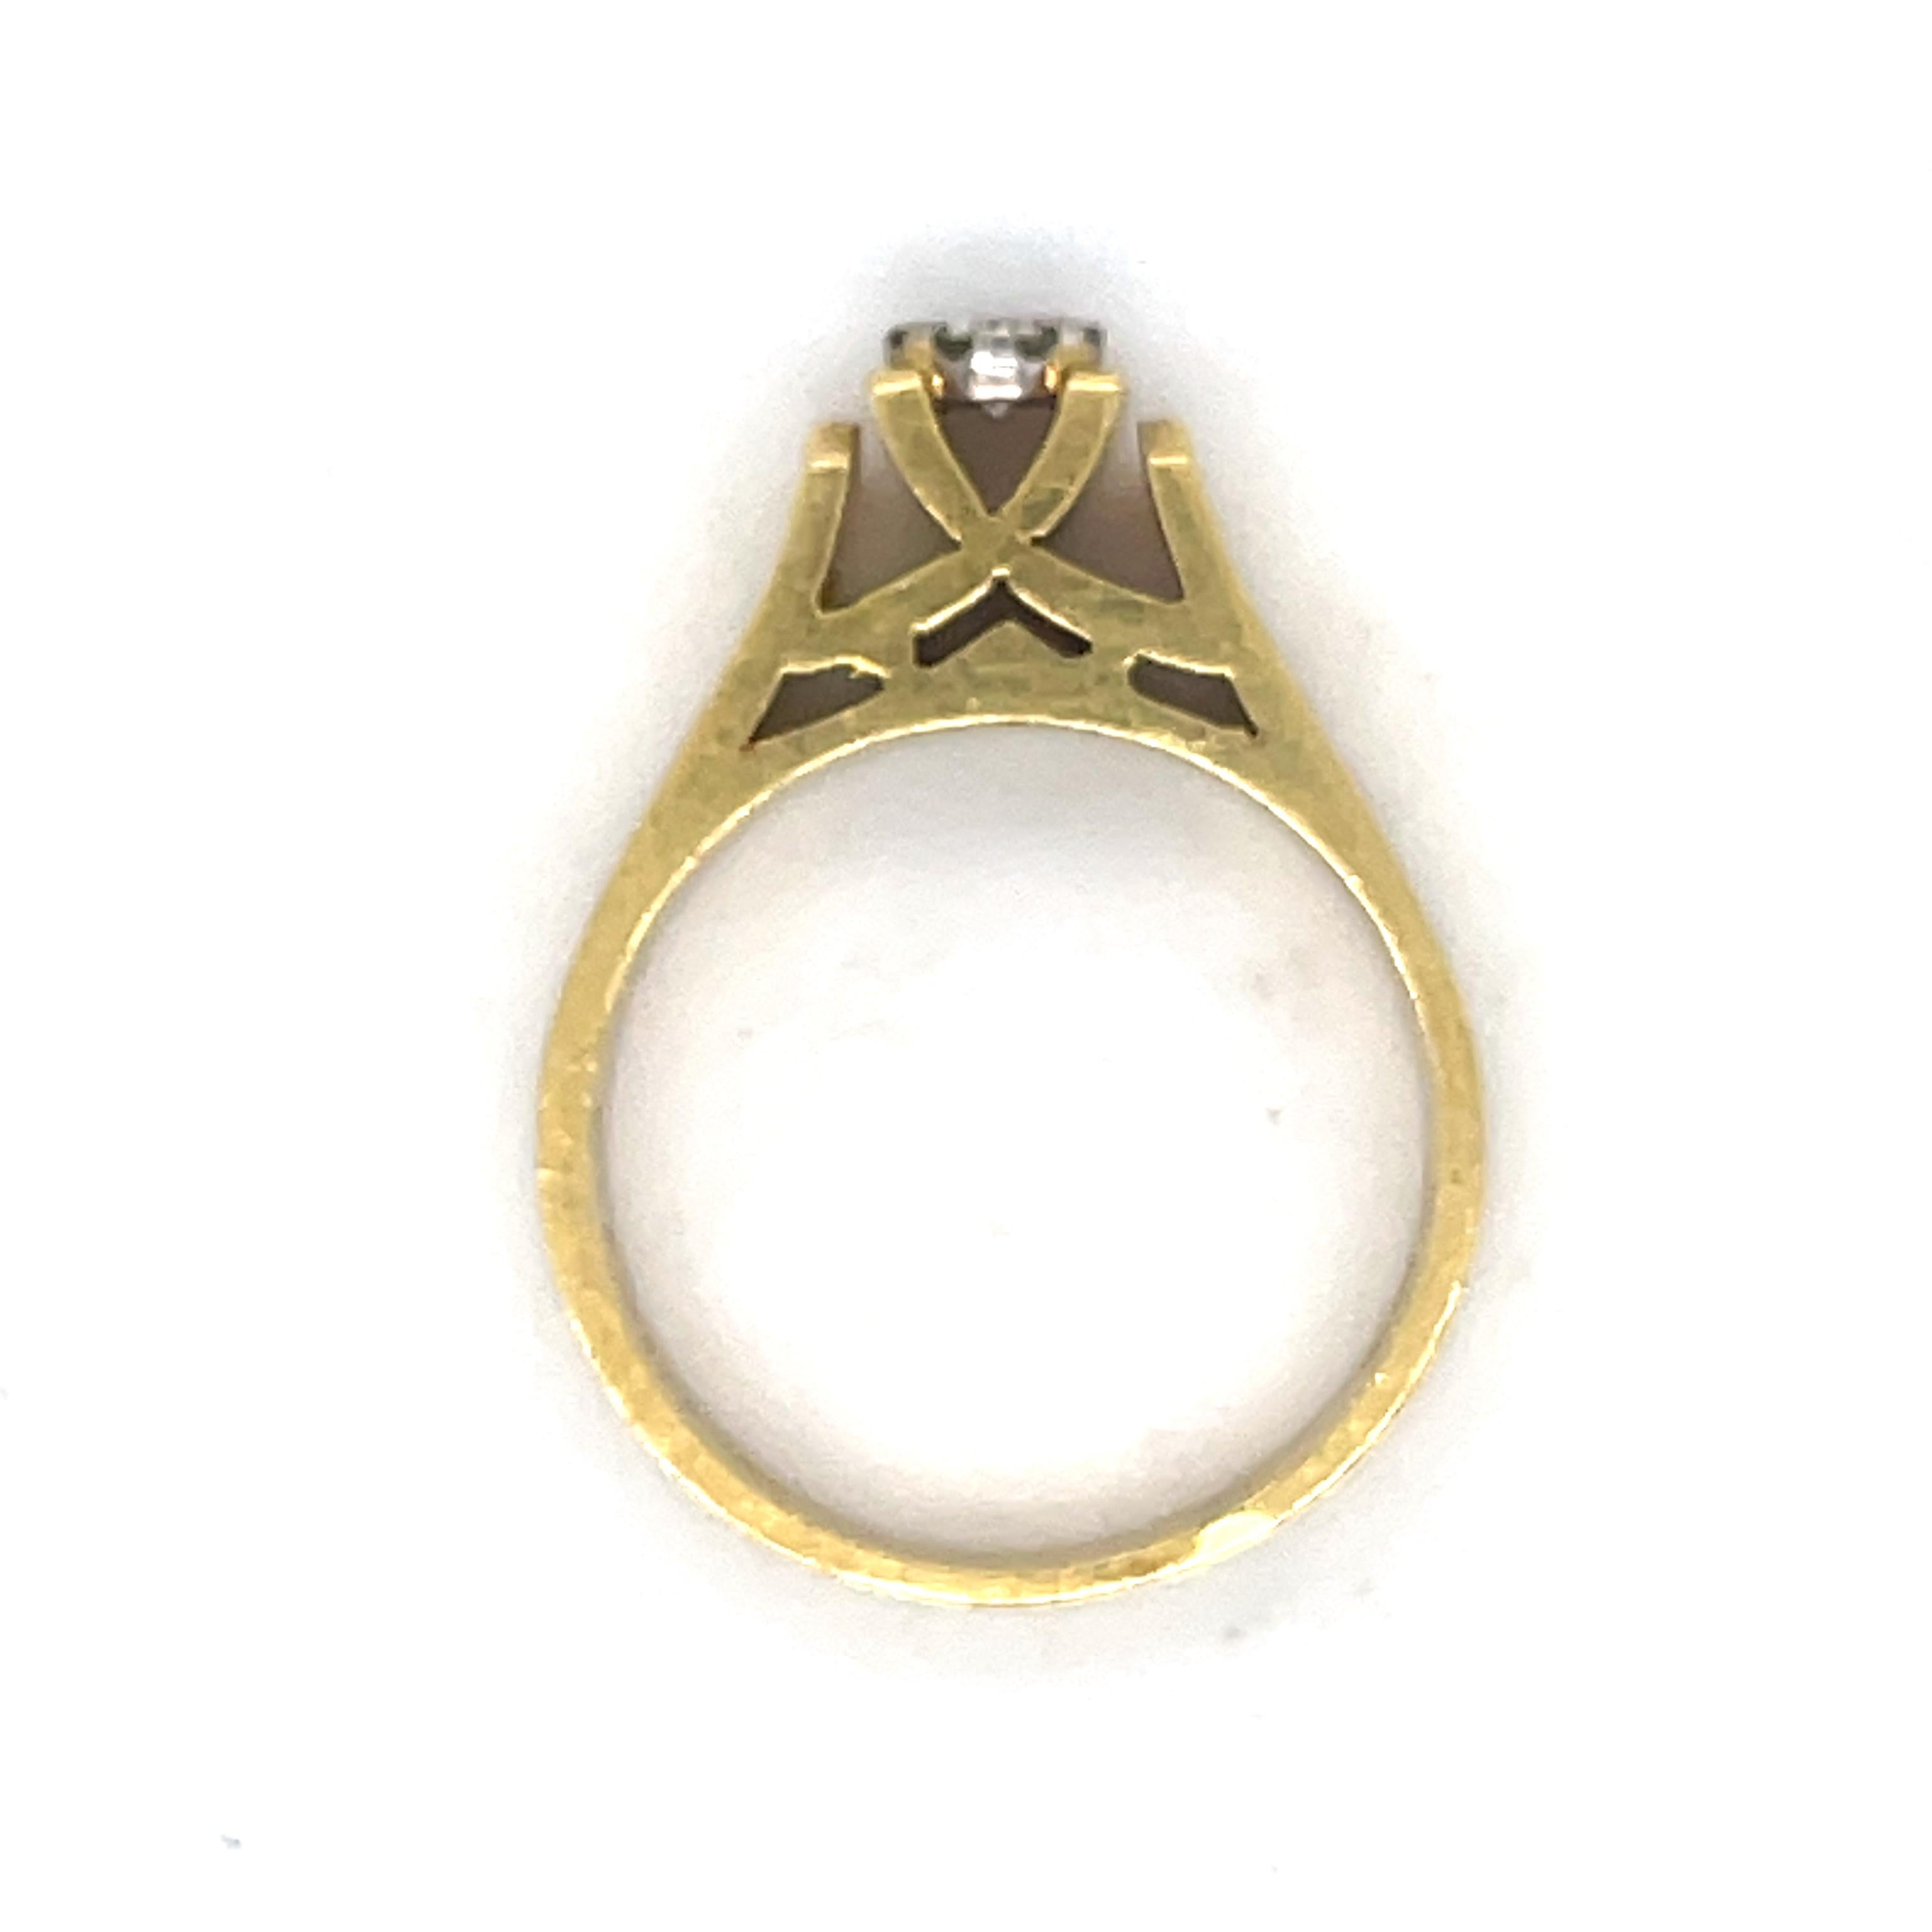 Unique Engagement Ring, 0.25CT diamond, 18K yellow gold, detailed high setting